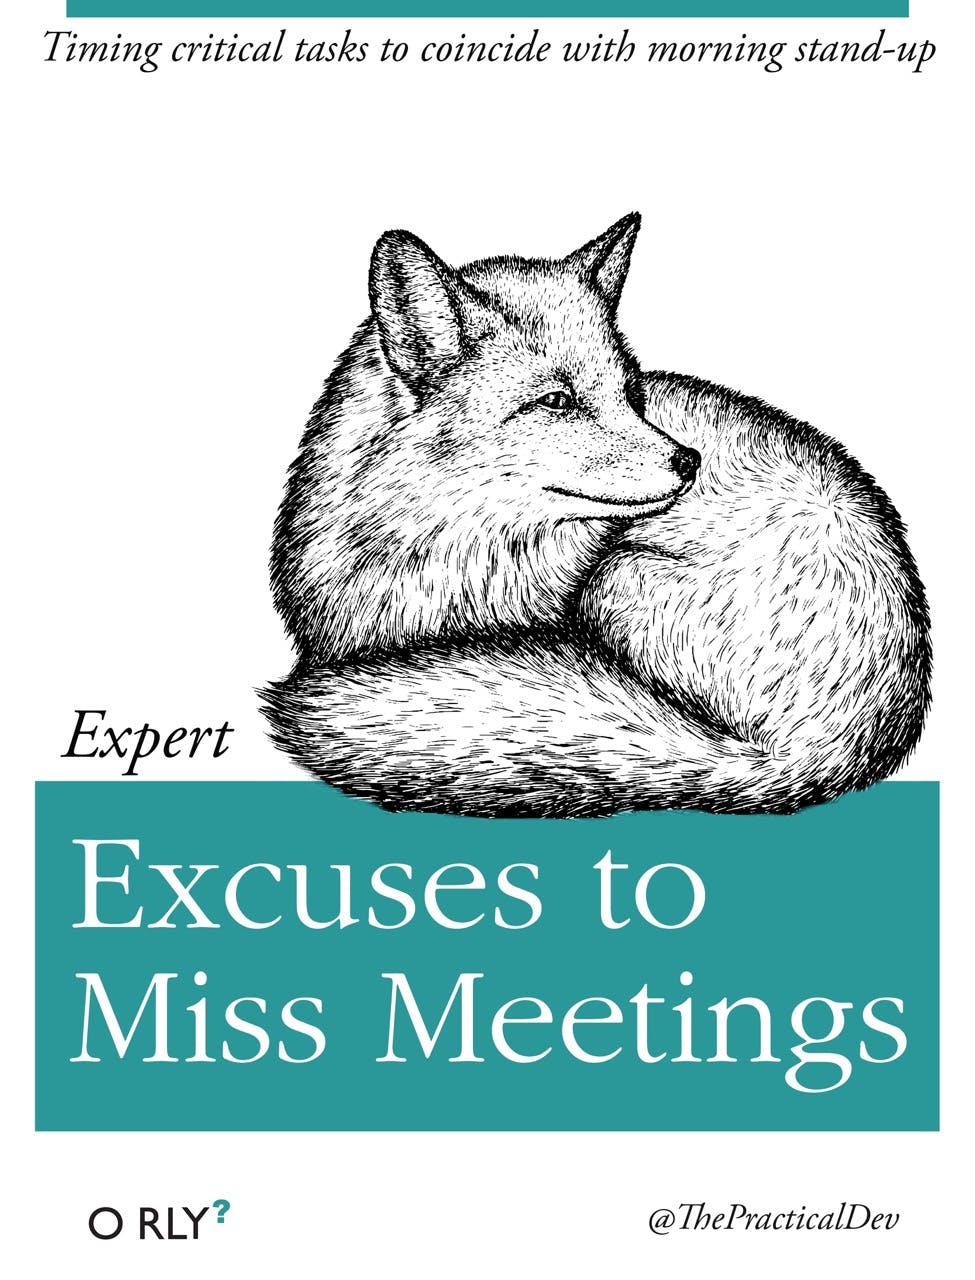 Excuses to Miss Meetings | Timing critical tasks to coincide with morning stand-up